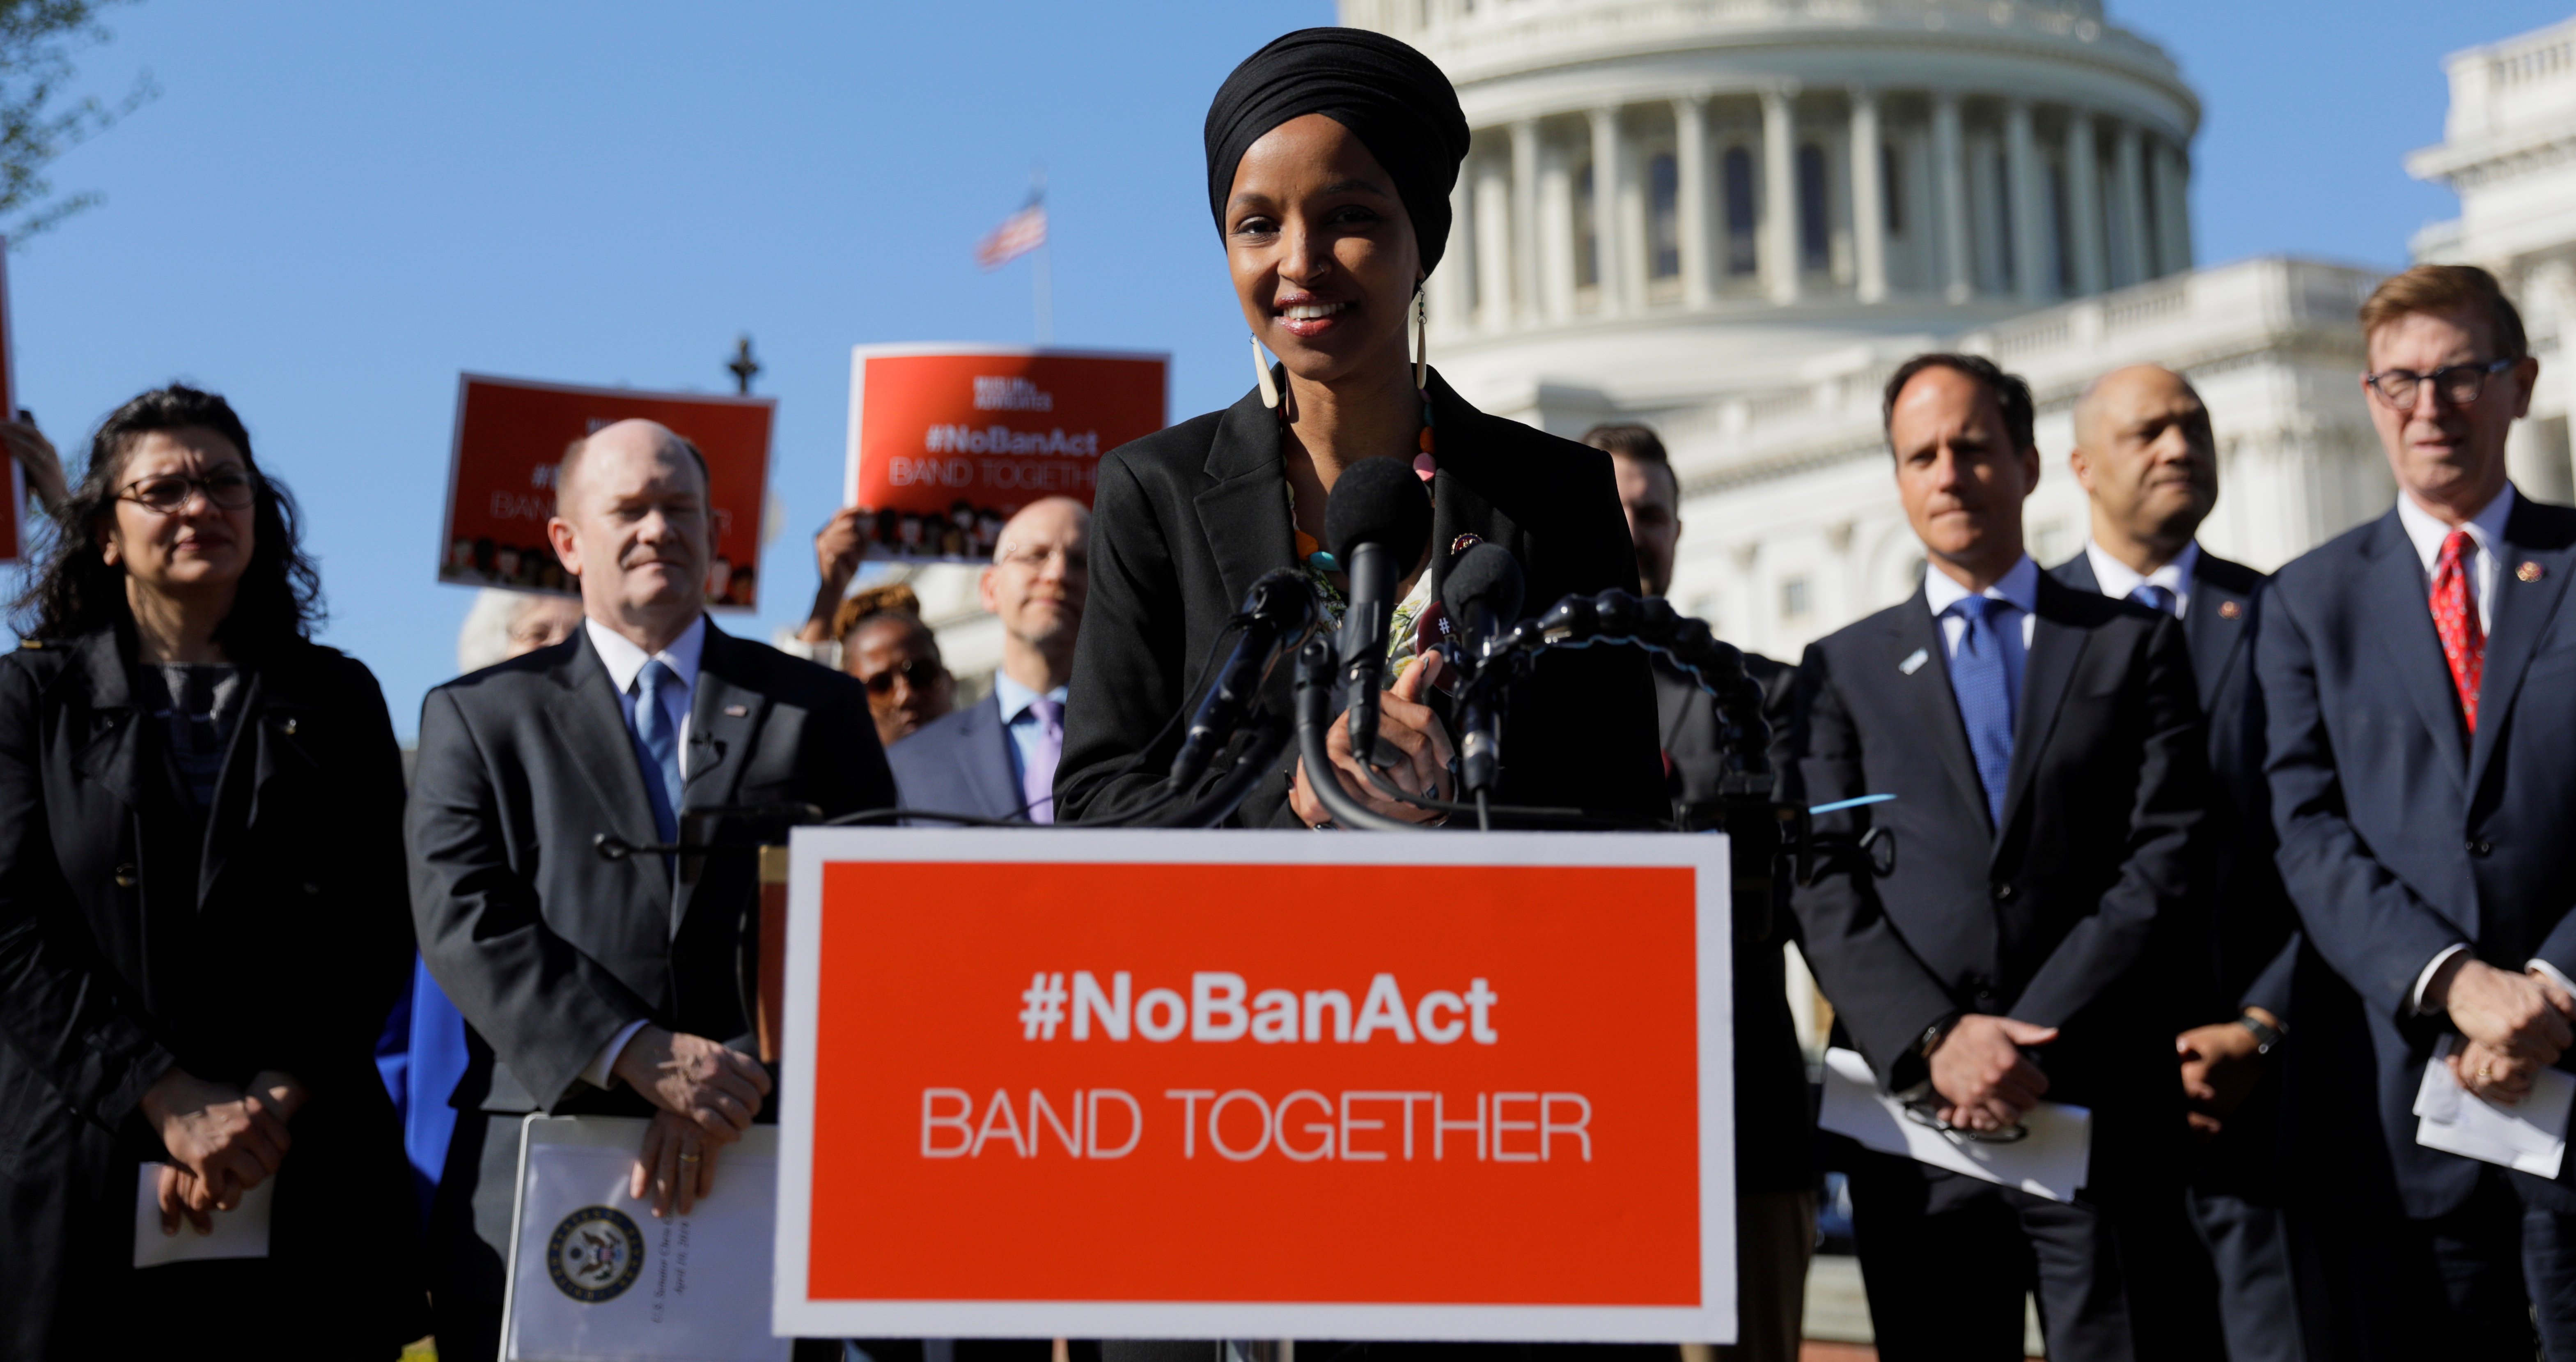 Rep. Ilhan Omar (D-MN) speaks about Trump administration policies towards Muslim immigrants at a news conference by members of the U.S. Congress "to announce legislation to repeal President Trumpís existing executive order blocking travel from majority Muslim countries" outside the U.S. Capitol in Washington, U.S., April 10, 2019. REUTERS/Jim Bourg